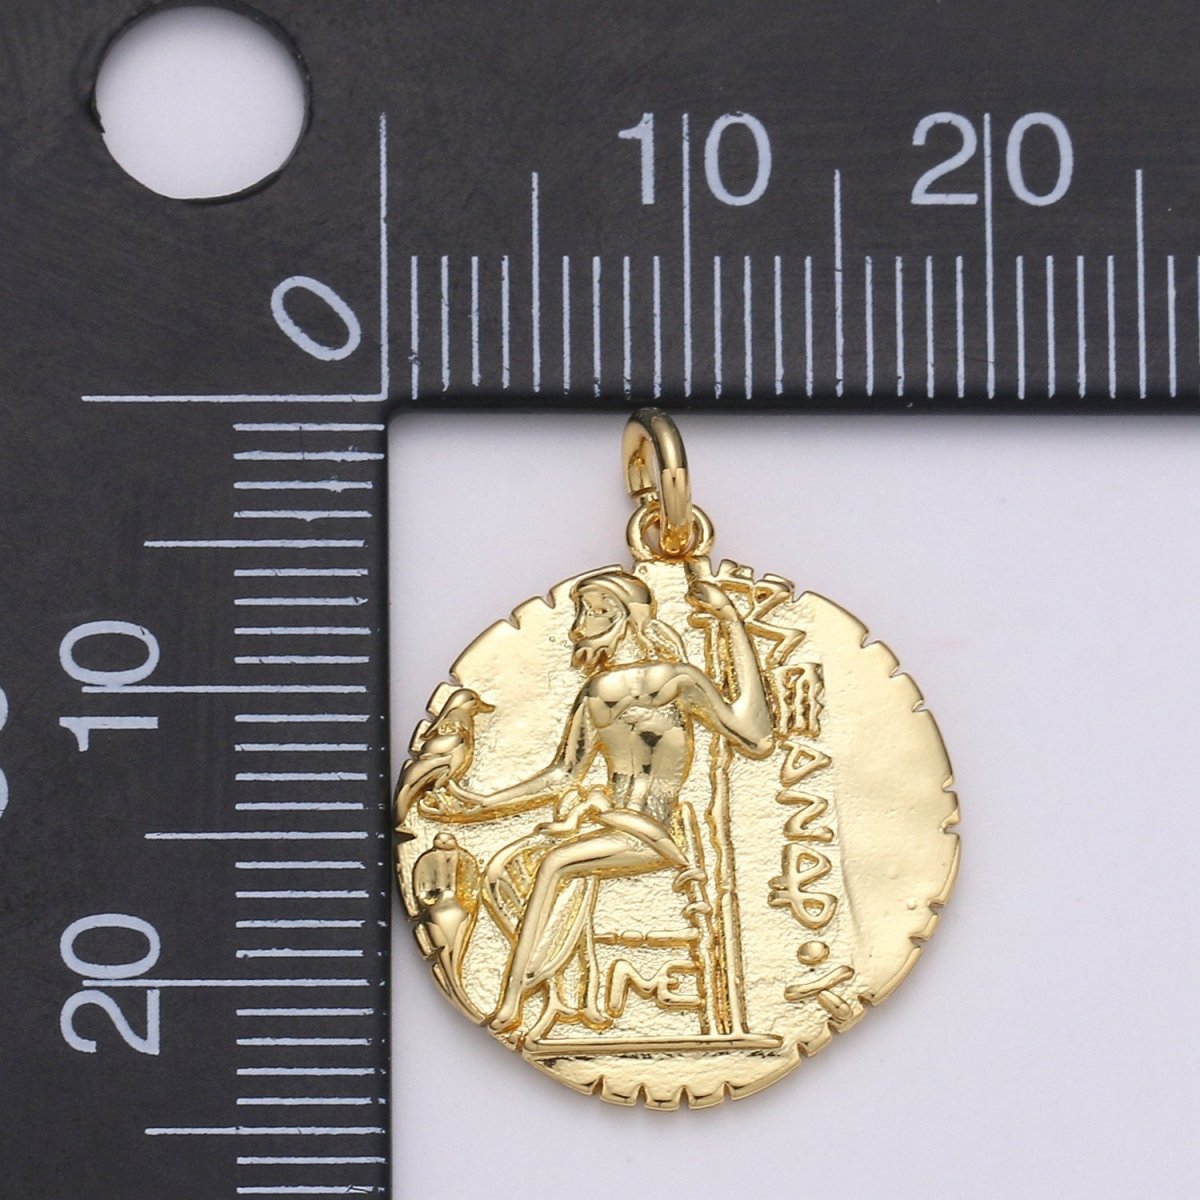 14k Gold Filled Ancient Gold Coin Pendant, Greek Warrior Alexander the Great Coin Pendant, Earing DIY, Roman Coin Pendant, Earing Coin D-151 - DLUXCA